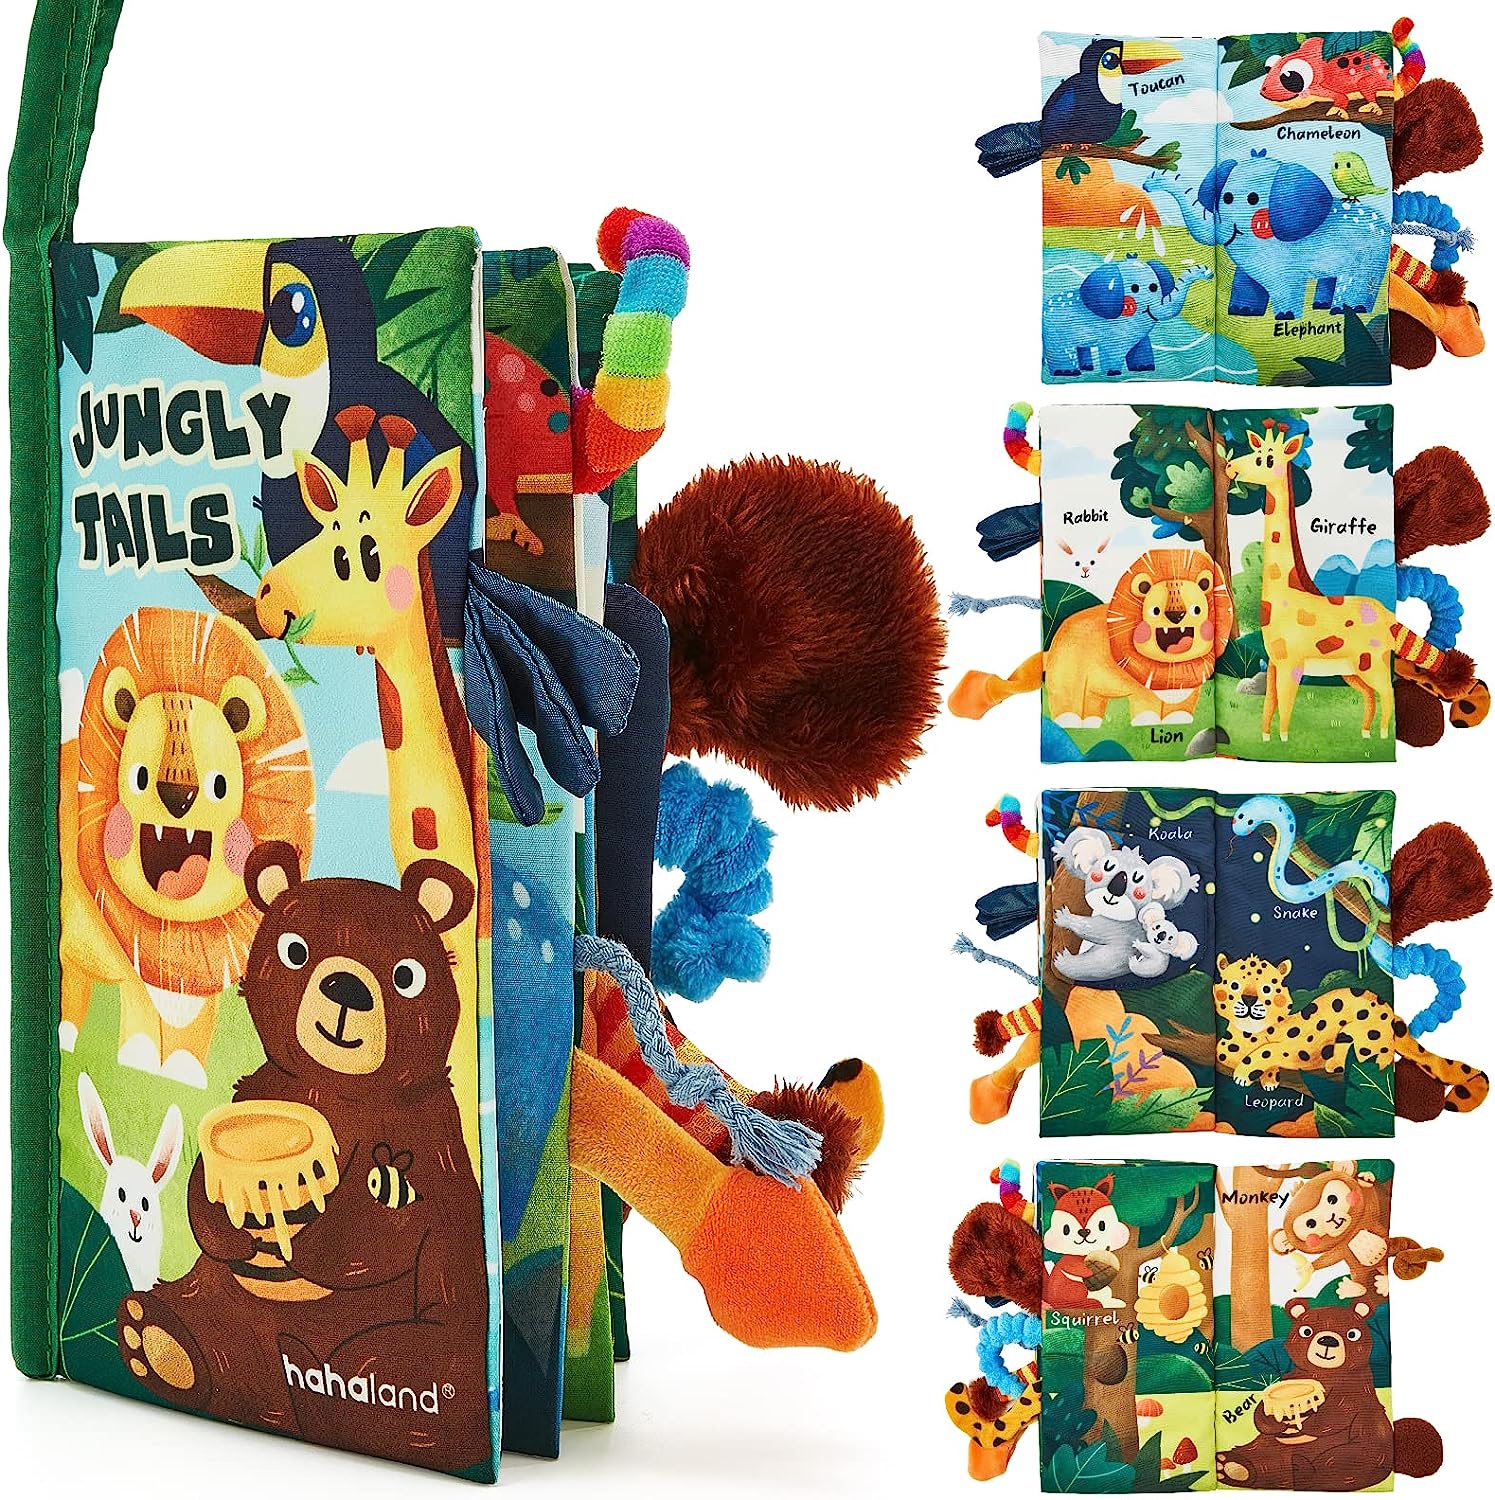 Baby Toys Jungle Tails Sensory Books for Babies Touch and Feel Soft Books, Crinkle Paper Baby Essentials for Newborn Infants Toys, Car Seat Baby Girls Gifts Newborn for 0 3 6 12 months Boys Girls